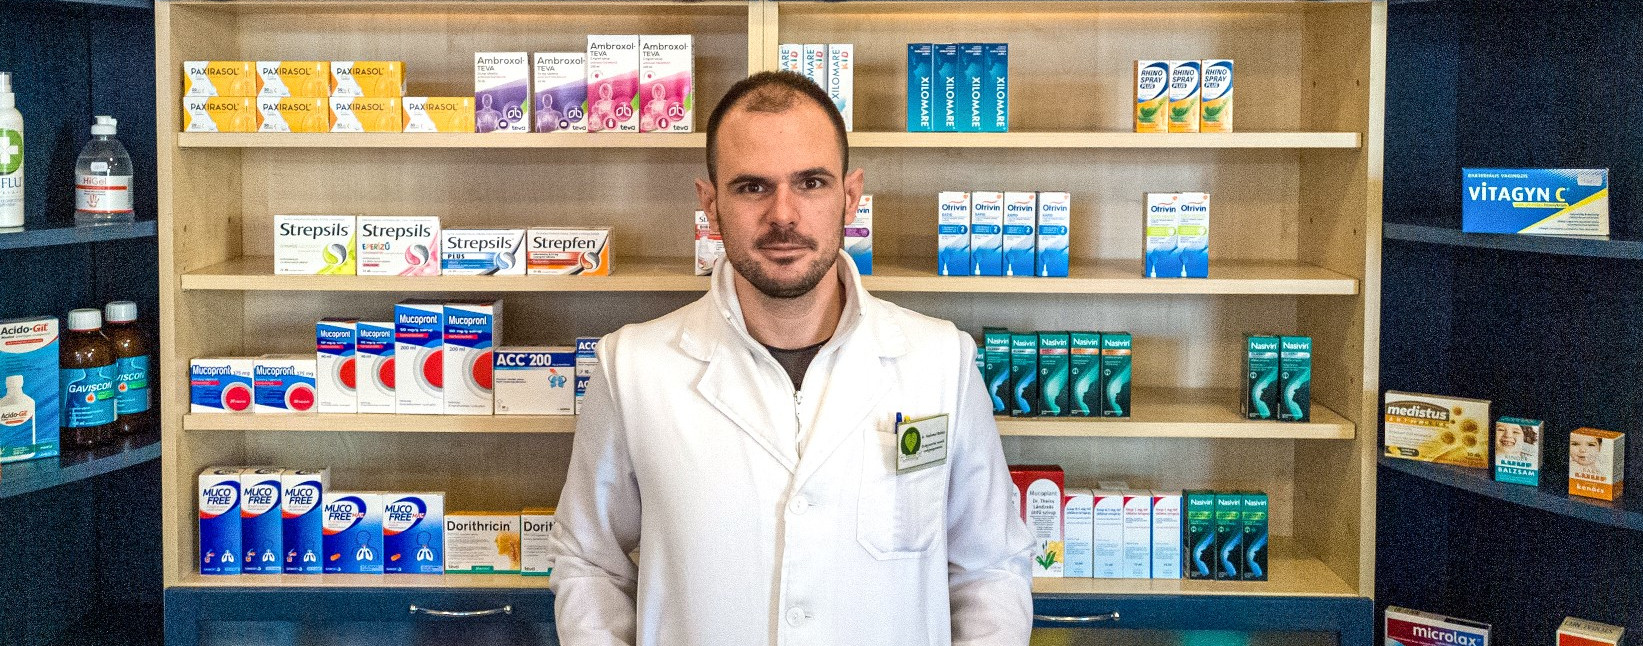 A pharmacist can build existence and a career in private healthcare too